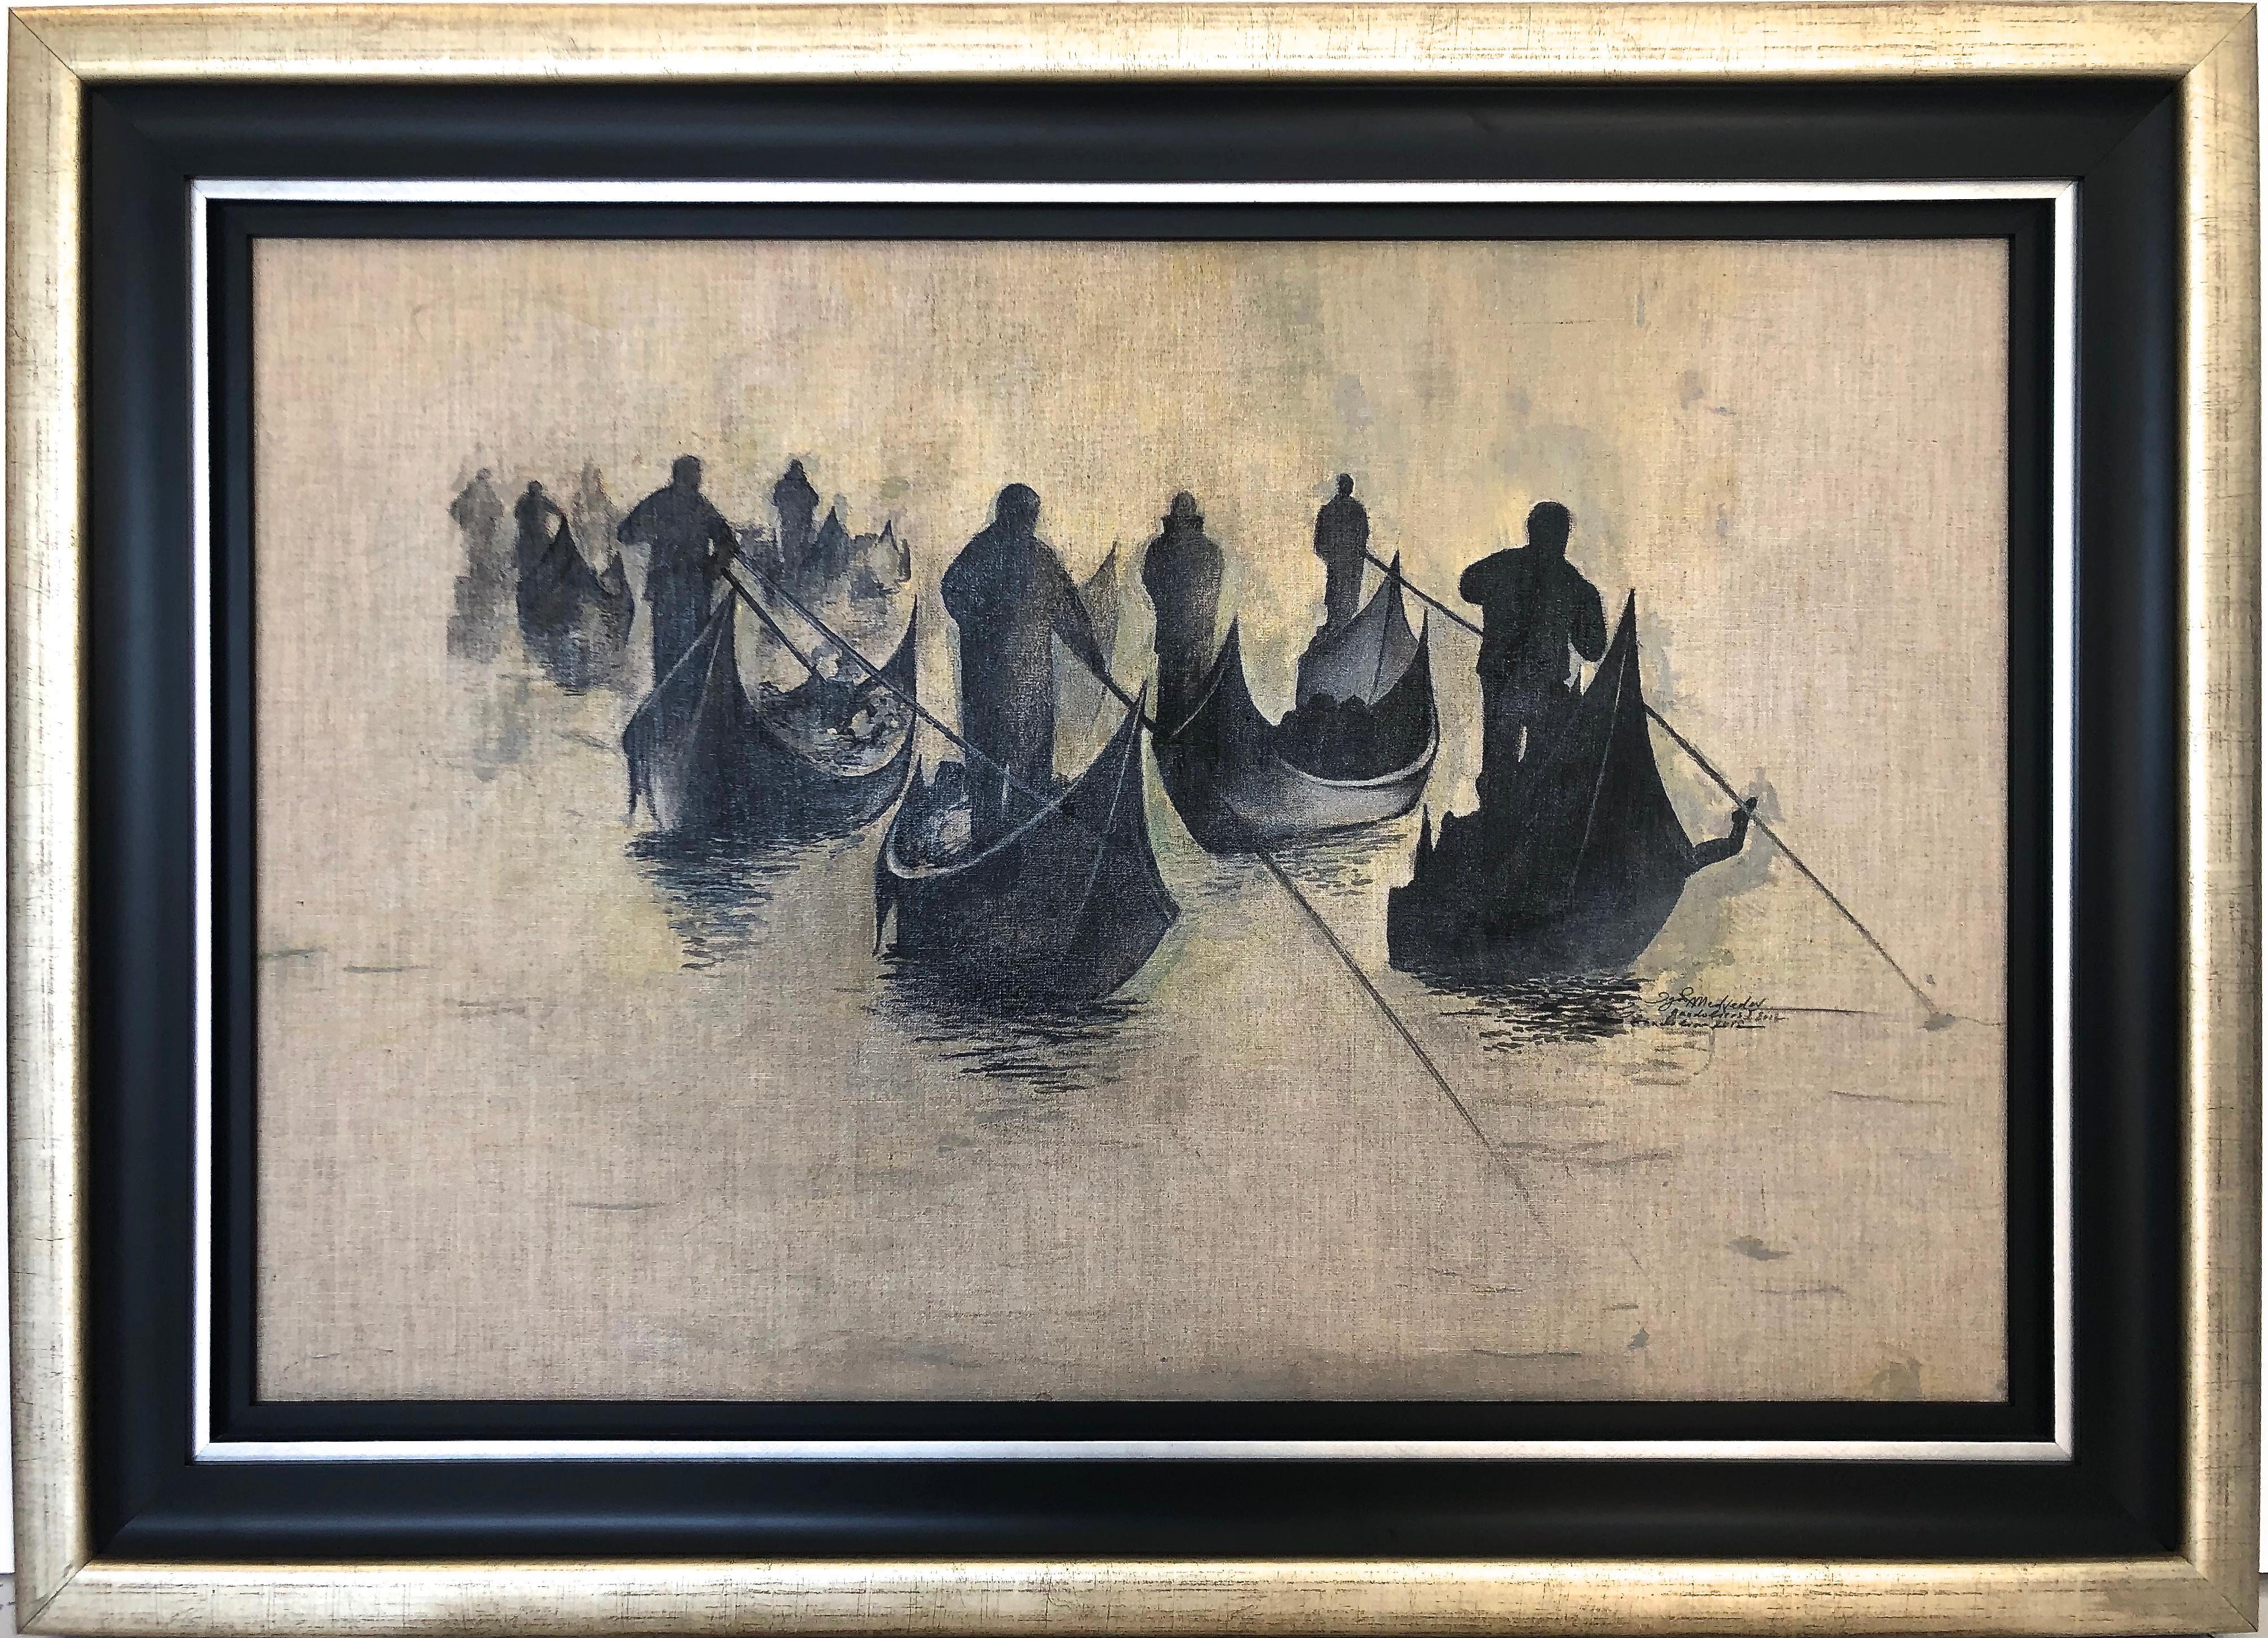  Gondoliers Group Gray and Black Oil Painting